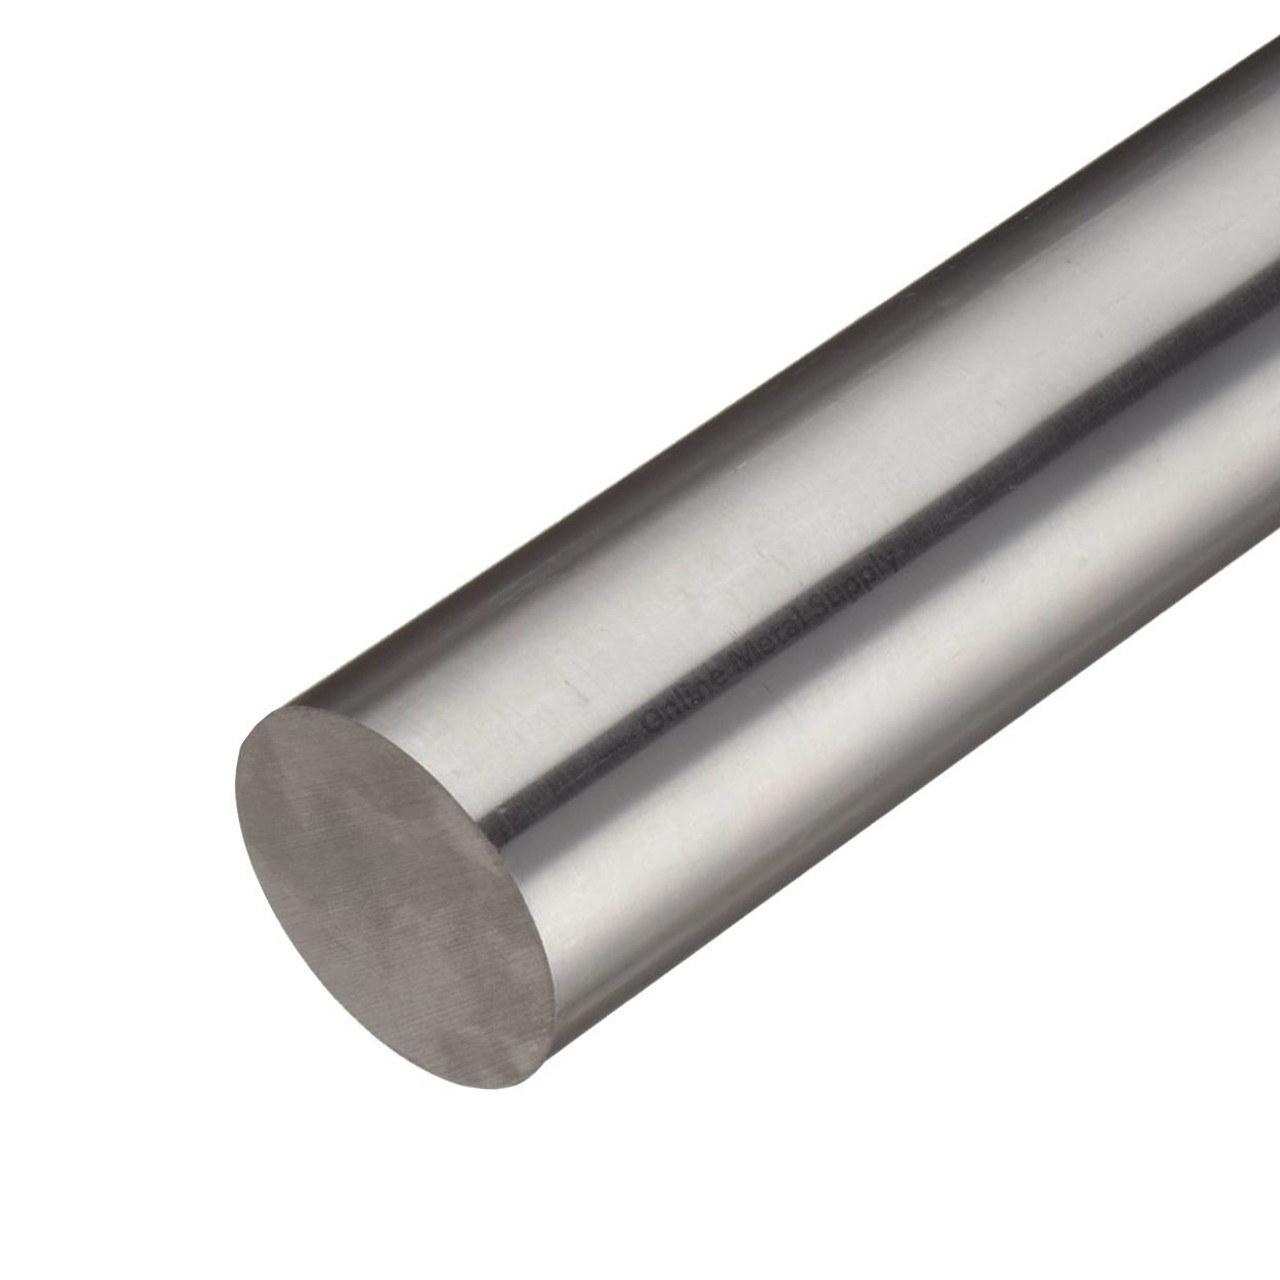 3.125 (3-1/8 inch) x 3.75 inches, 316 Stainless Steel Round Rod, Cold Finished